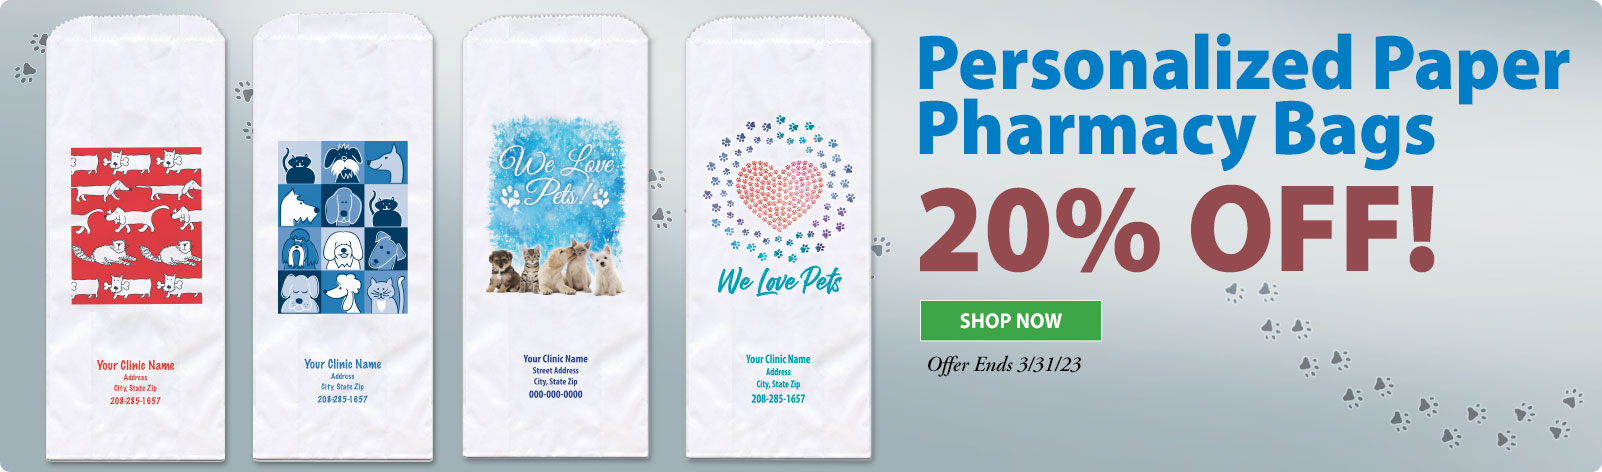 20% OFF Personalized Paper Pharmacy Bags!